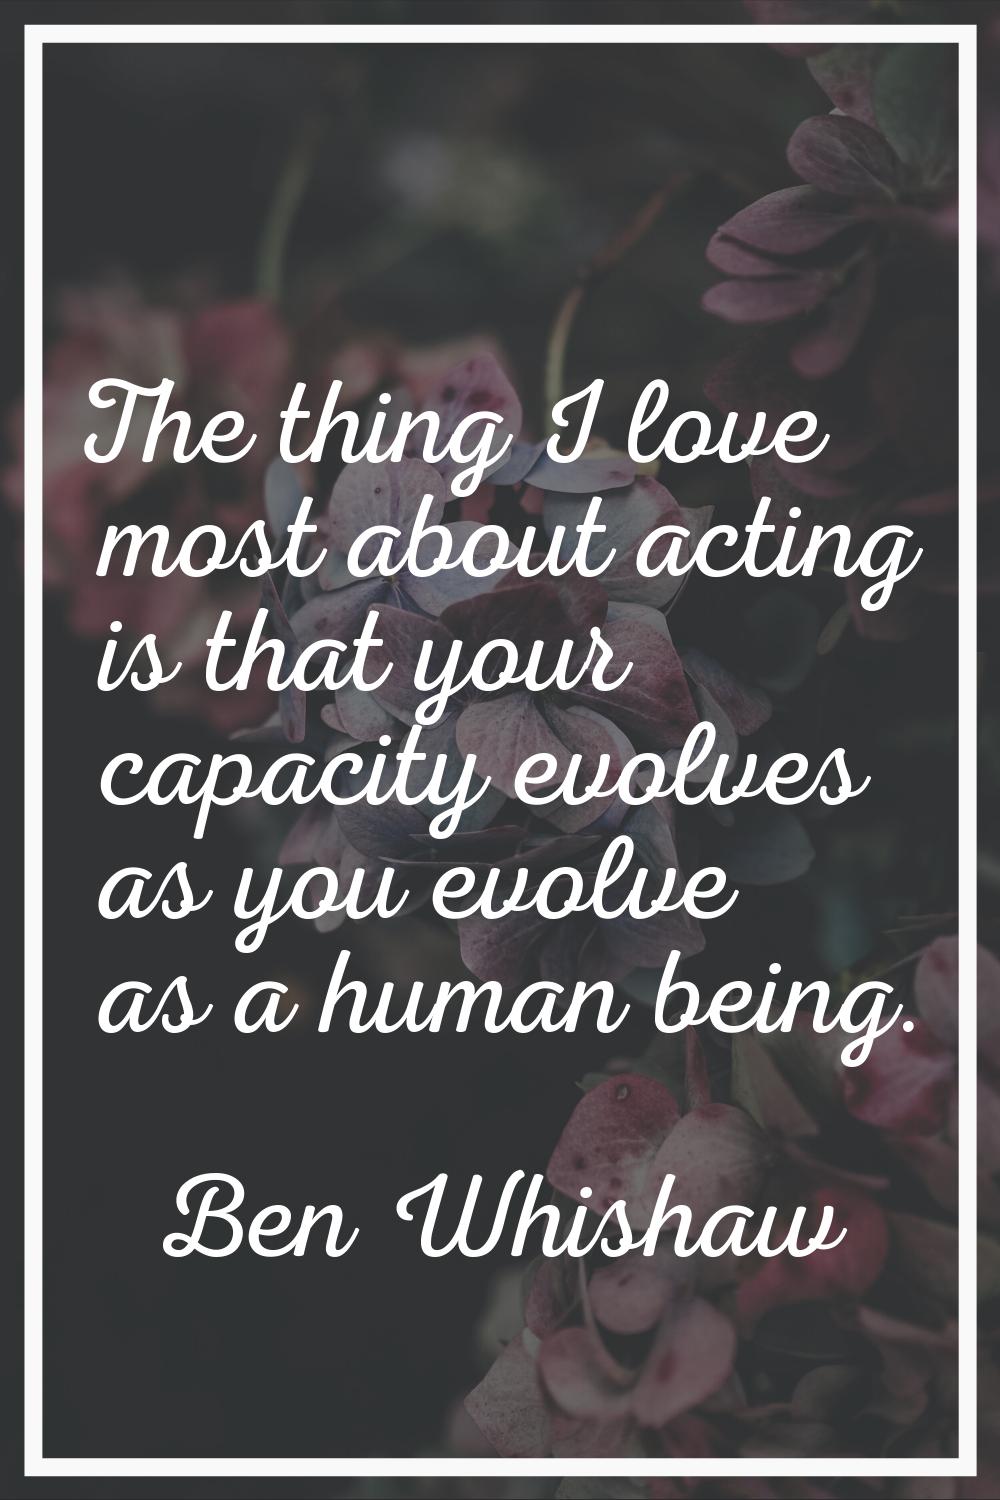 The thing I love most about acting is that your capacity evolves as you evolve as a human being.